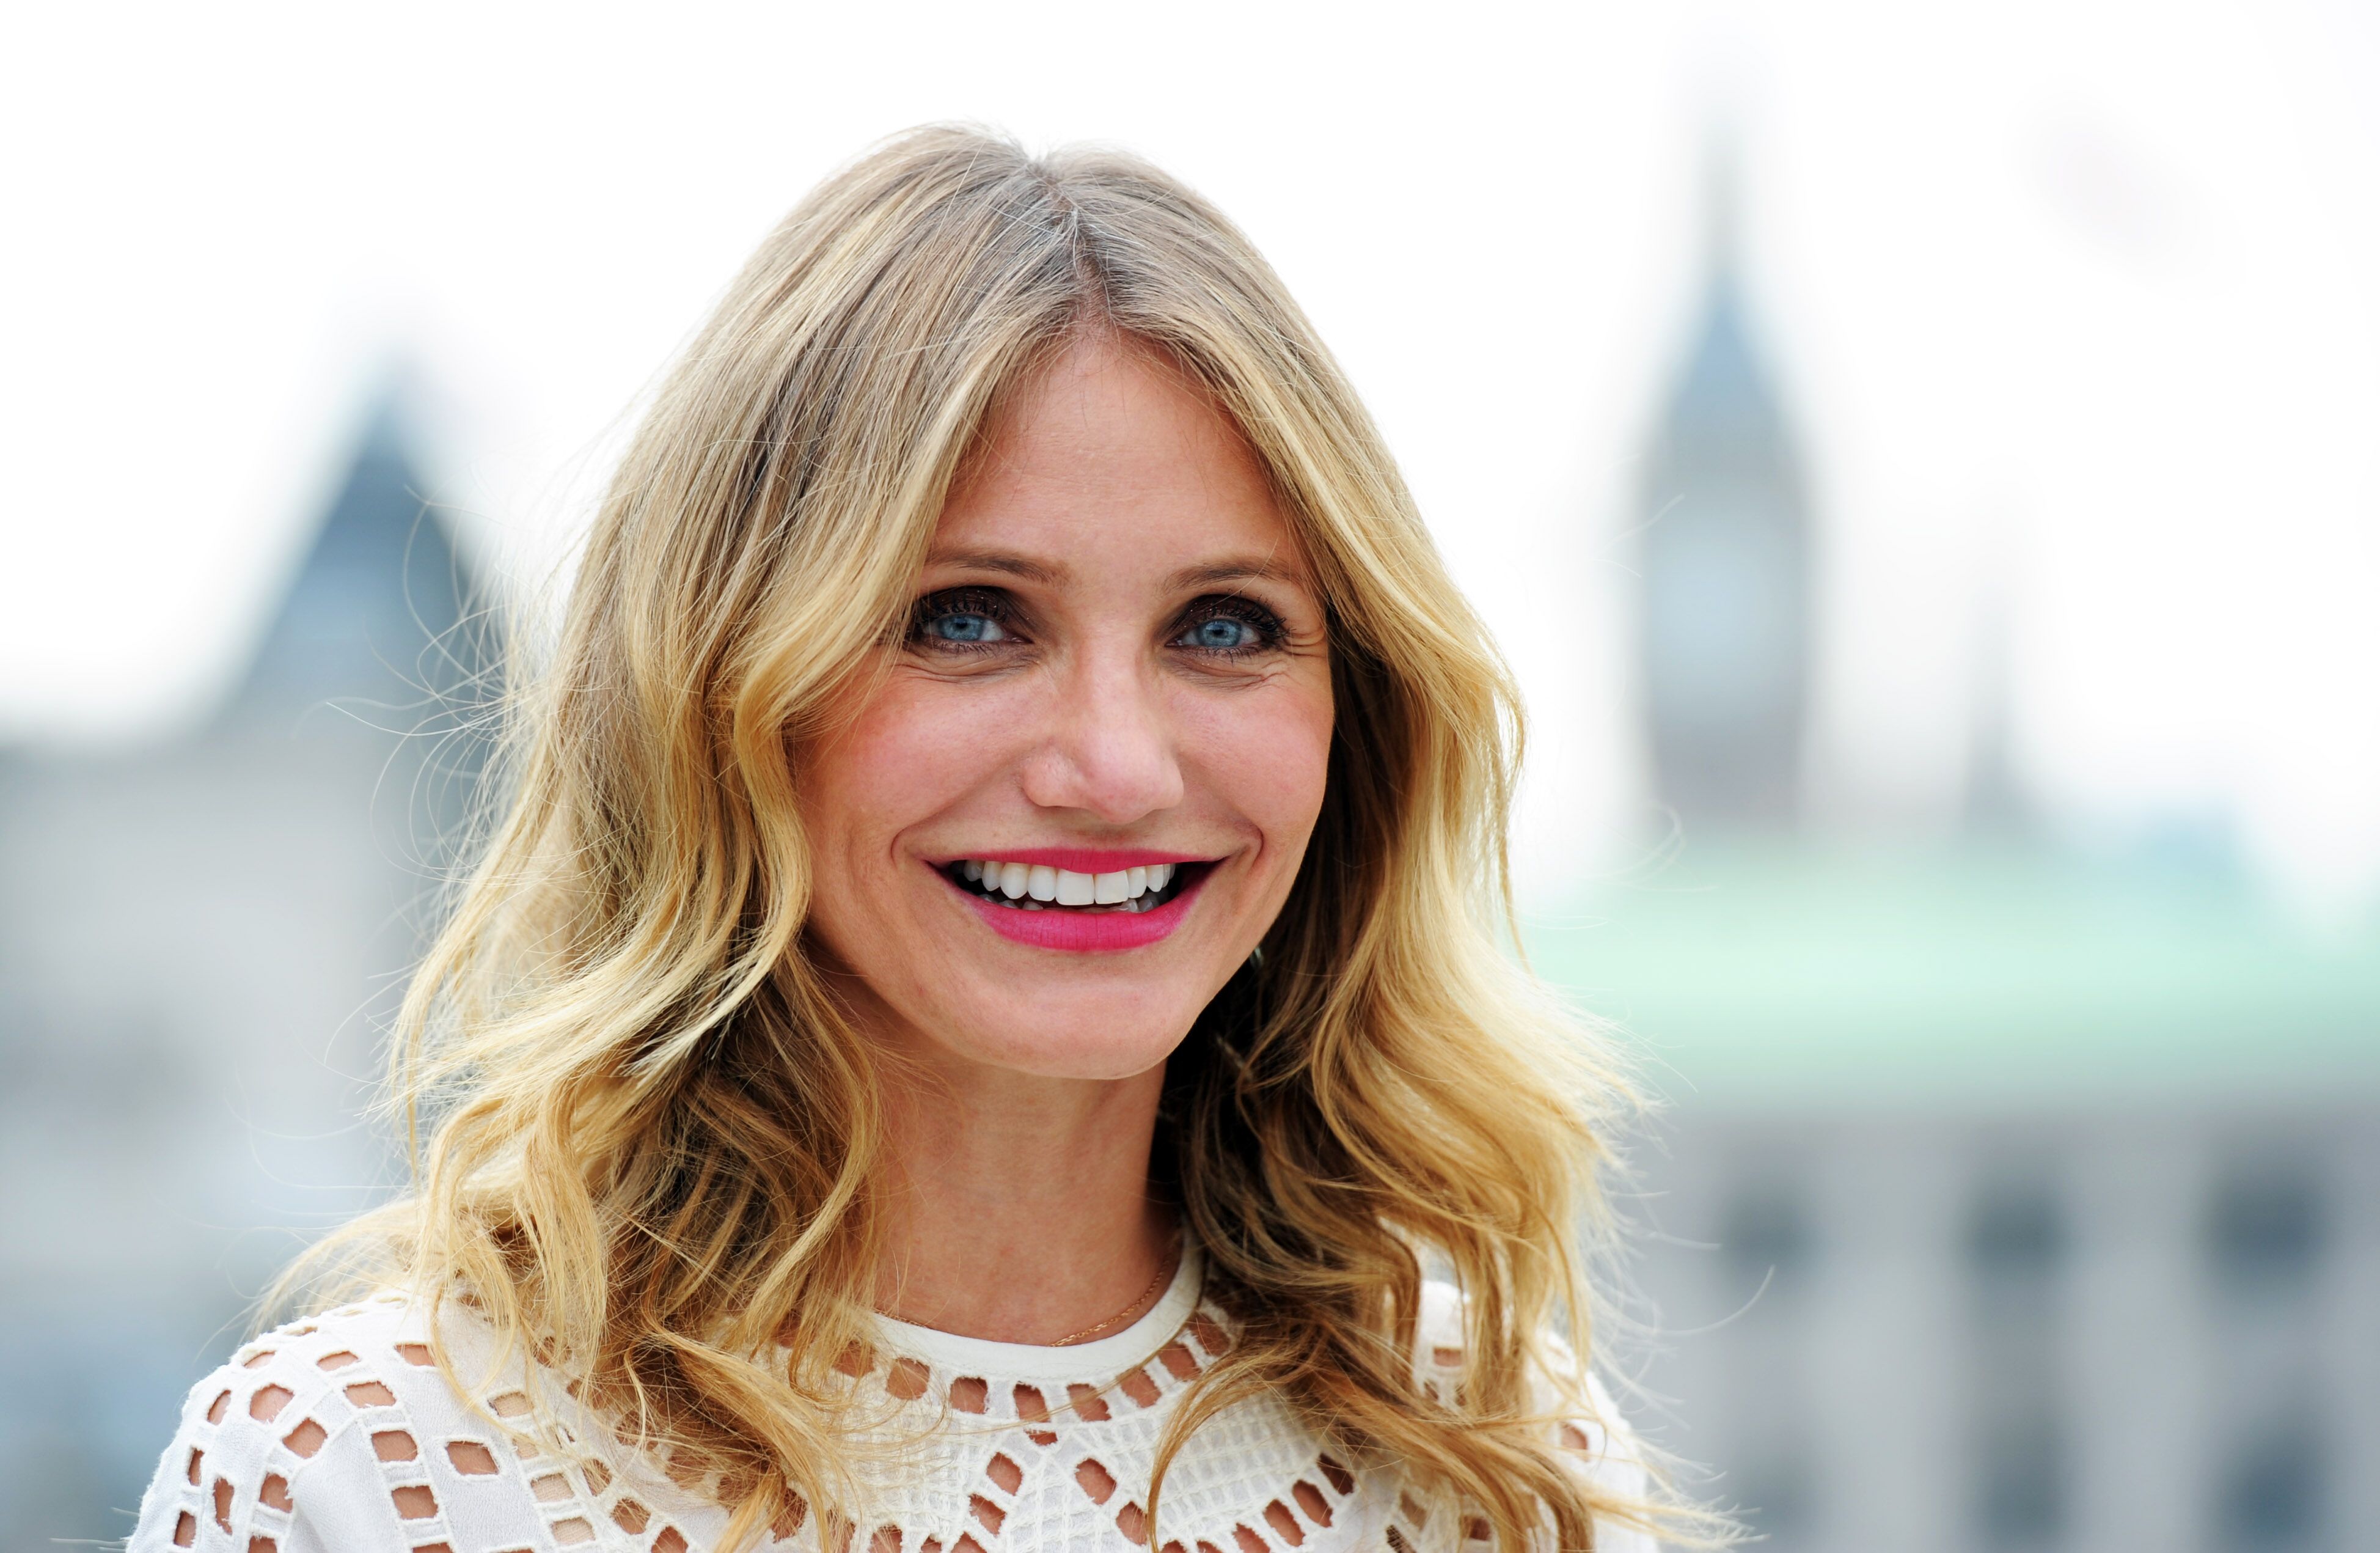 Cameron Diaz attends a photocall for "Sex Tape" at Corinthia Hotel London. | Source: Getty Images